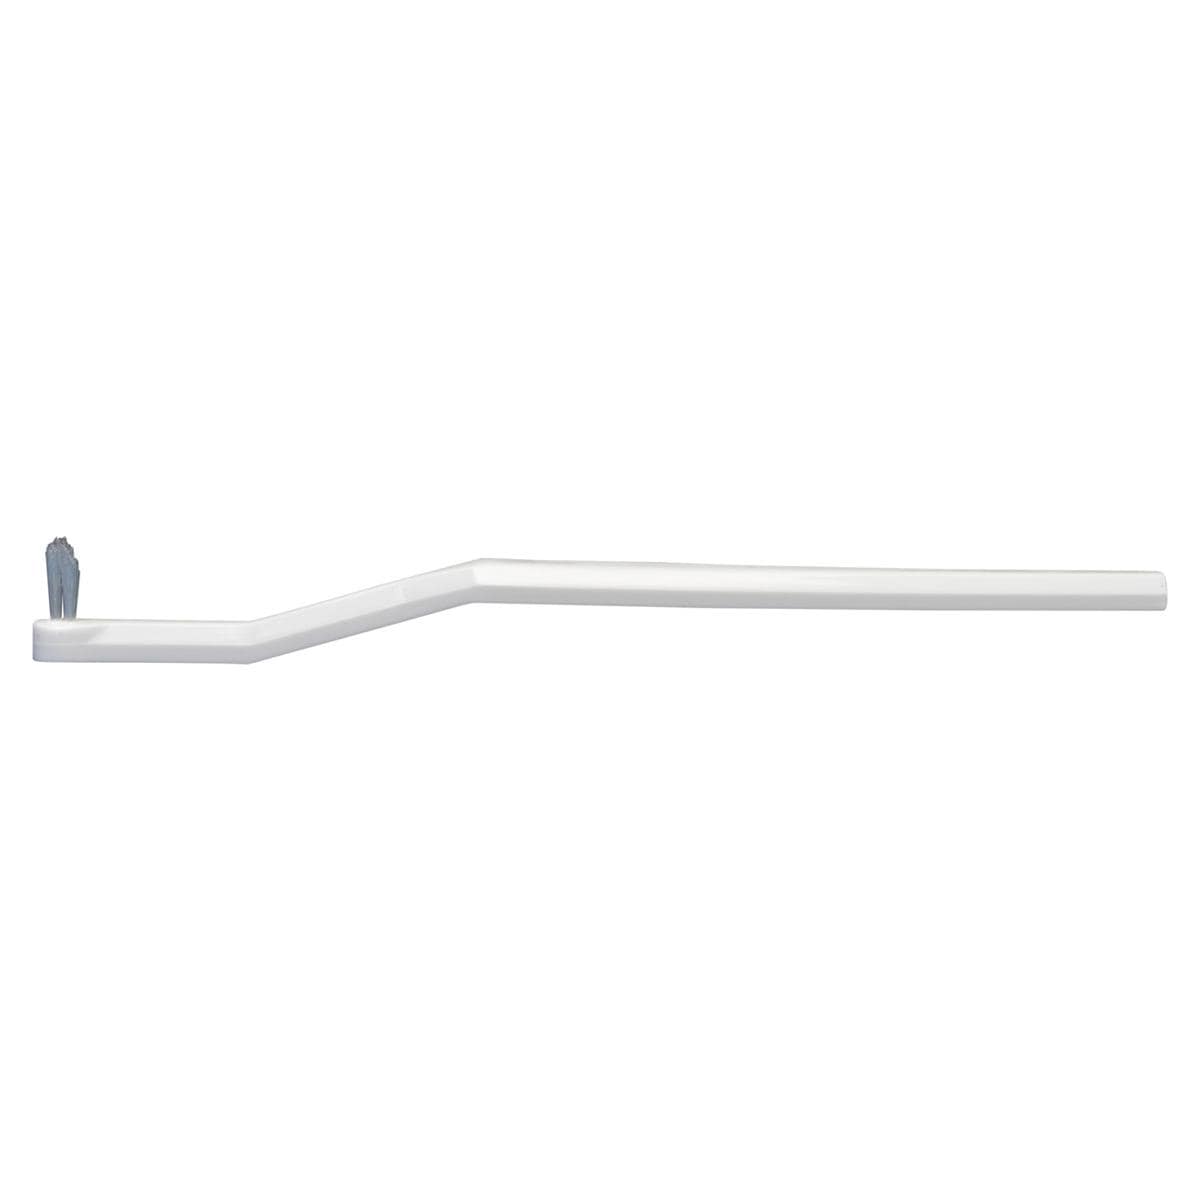 HS-Acclean® Toothbrush End Tuft - Packung 12 Stück